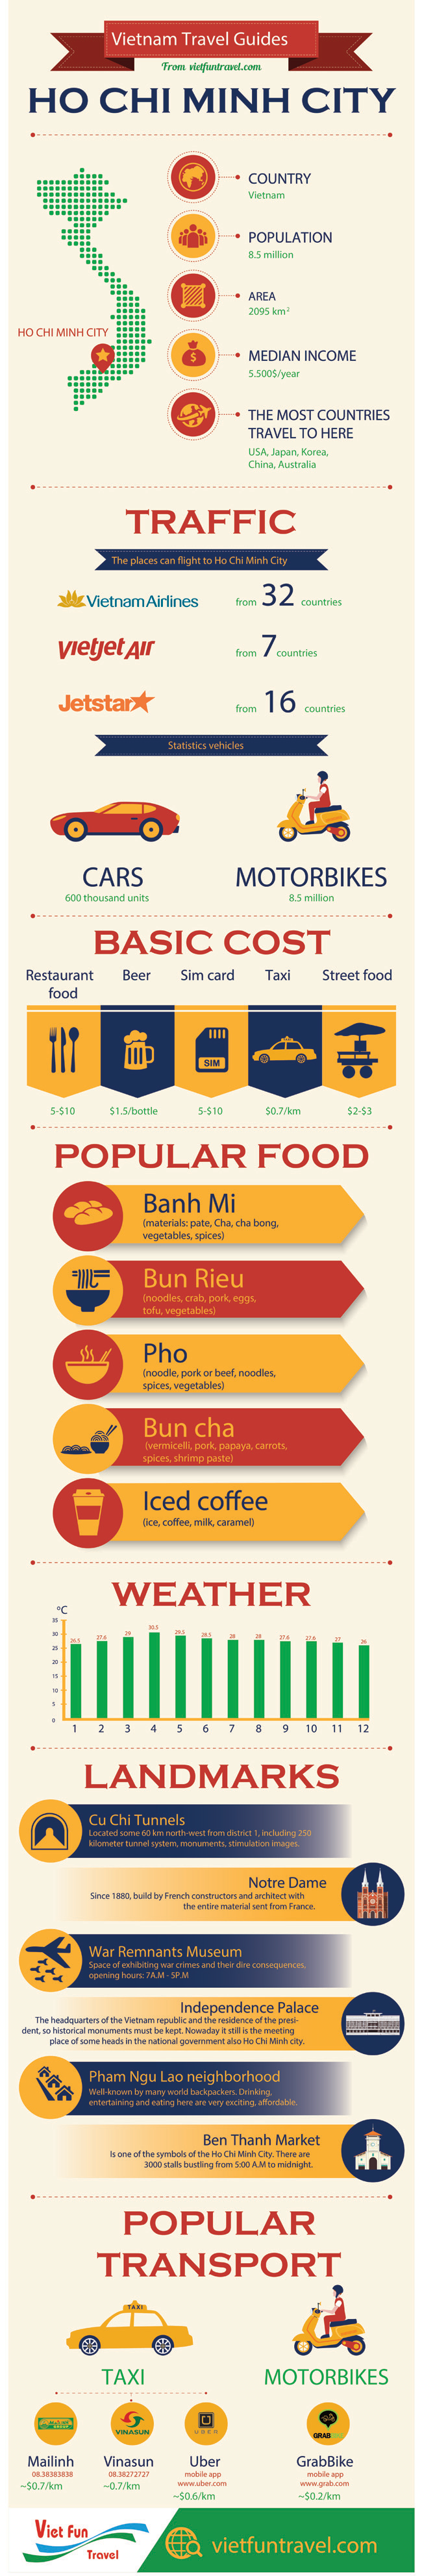 Ho Chi Minh city travel guide [INFOGRAPHIC]